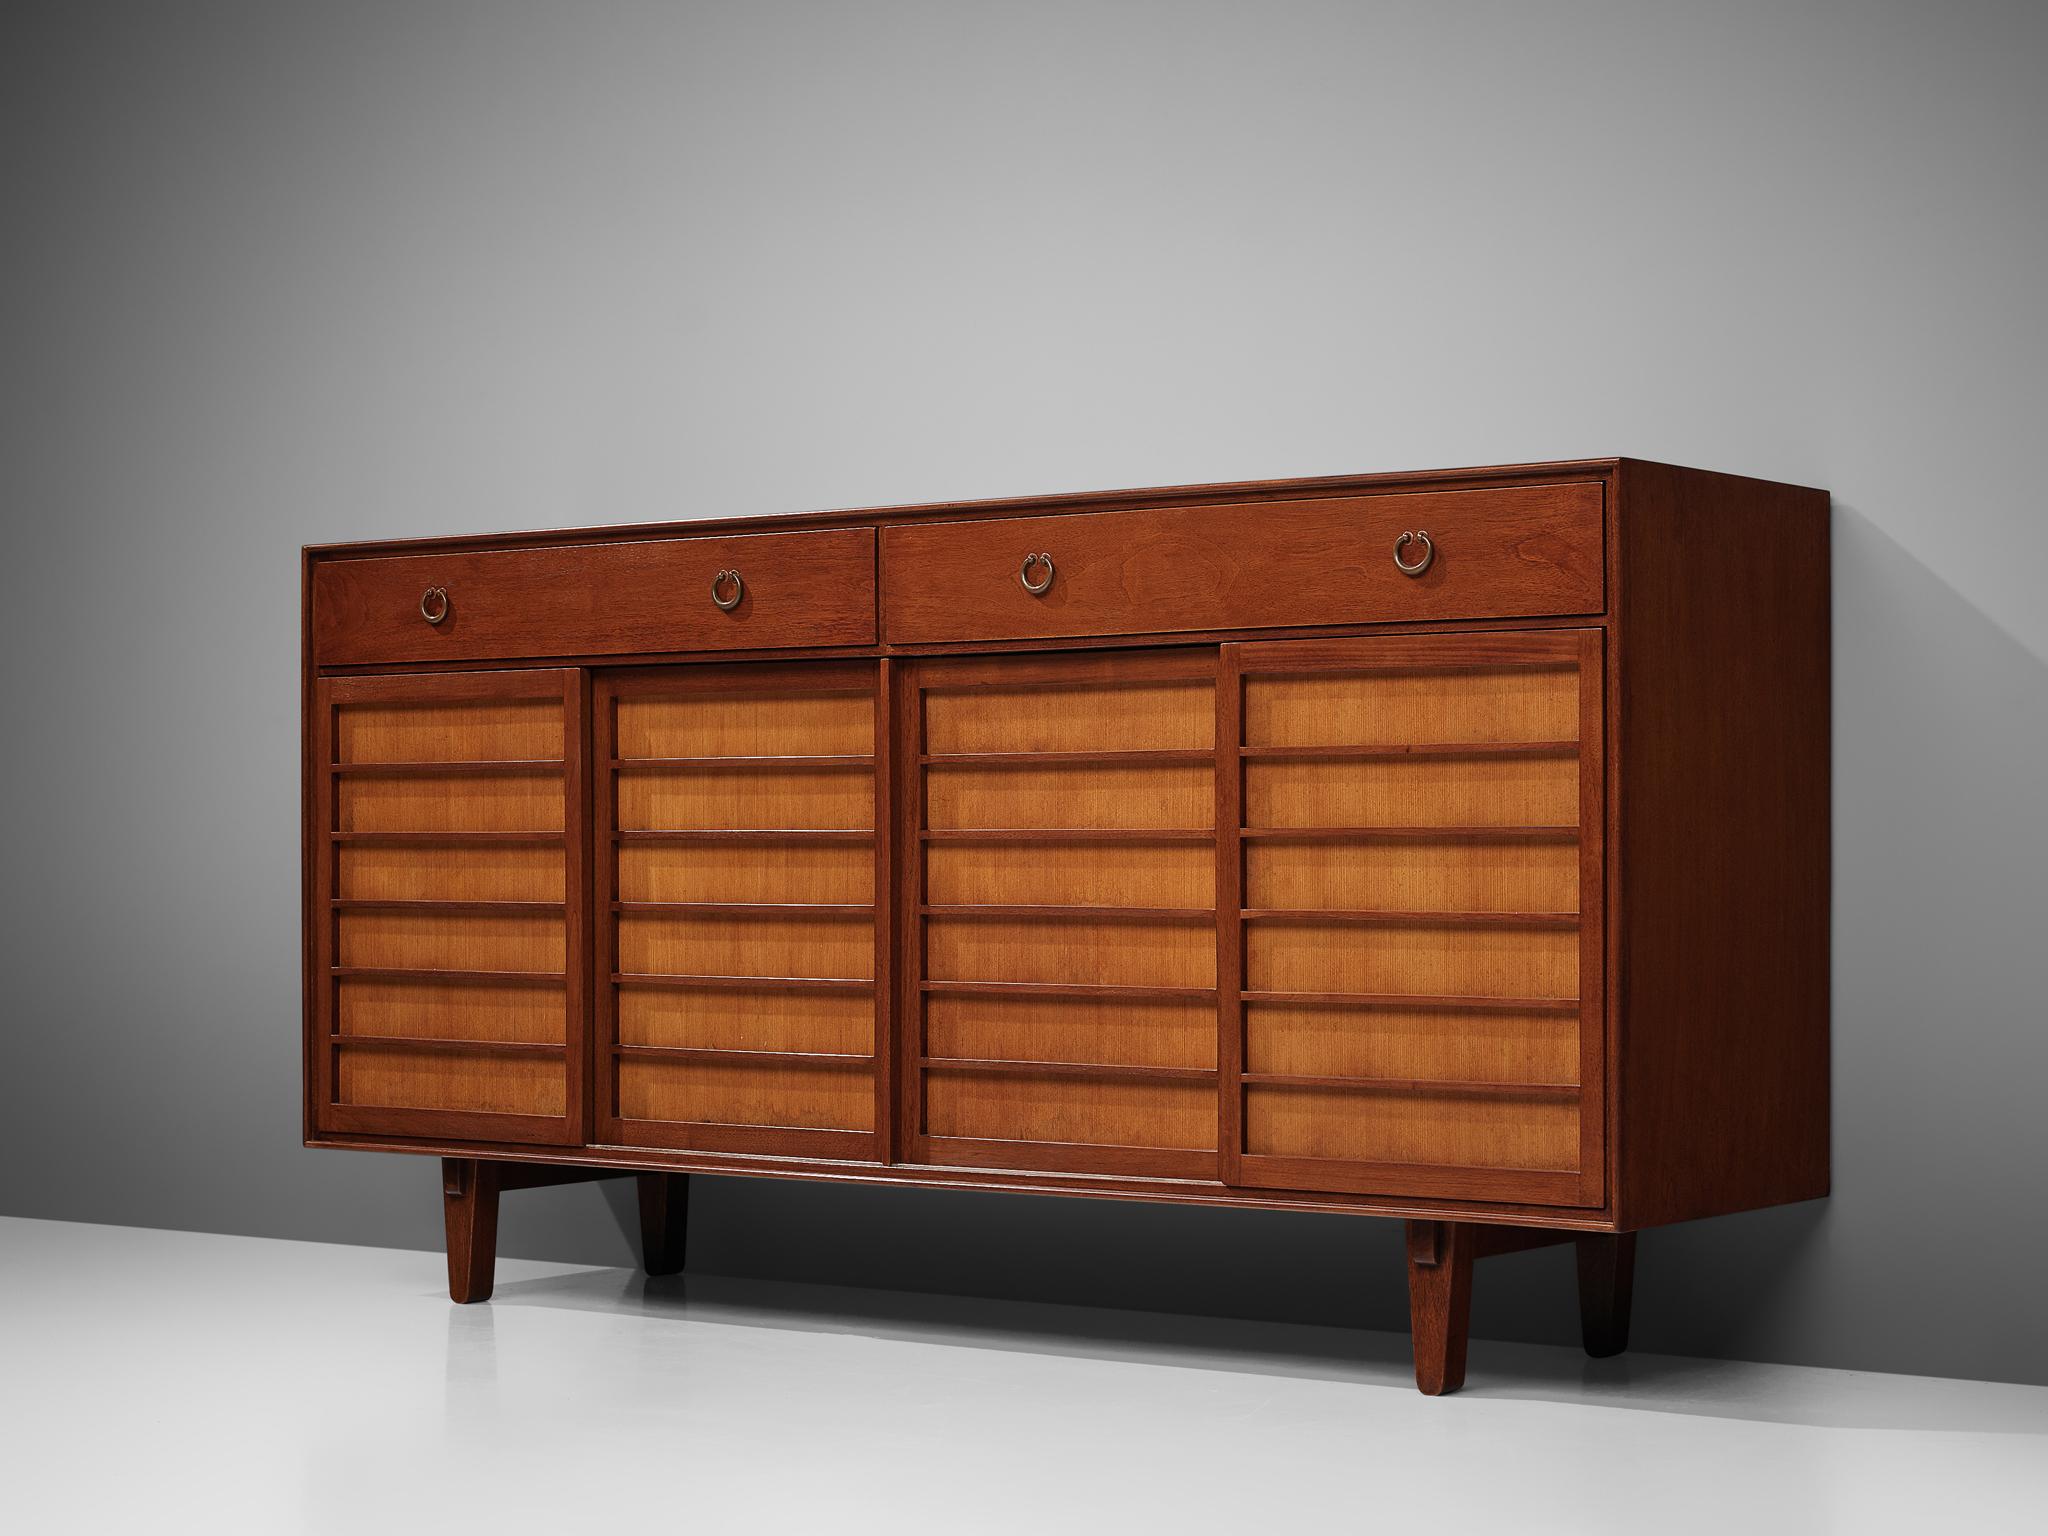 Edward Wormley for Dunbar, sideboard '671A', walnut and brass, United States, 1950s

Early model 671A sideboard by Edward Wormley. The credenza is made with a walnut cas with four drawers and four sliding doors. The drawers are equipped with brass